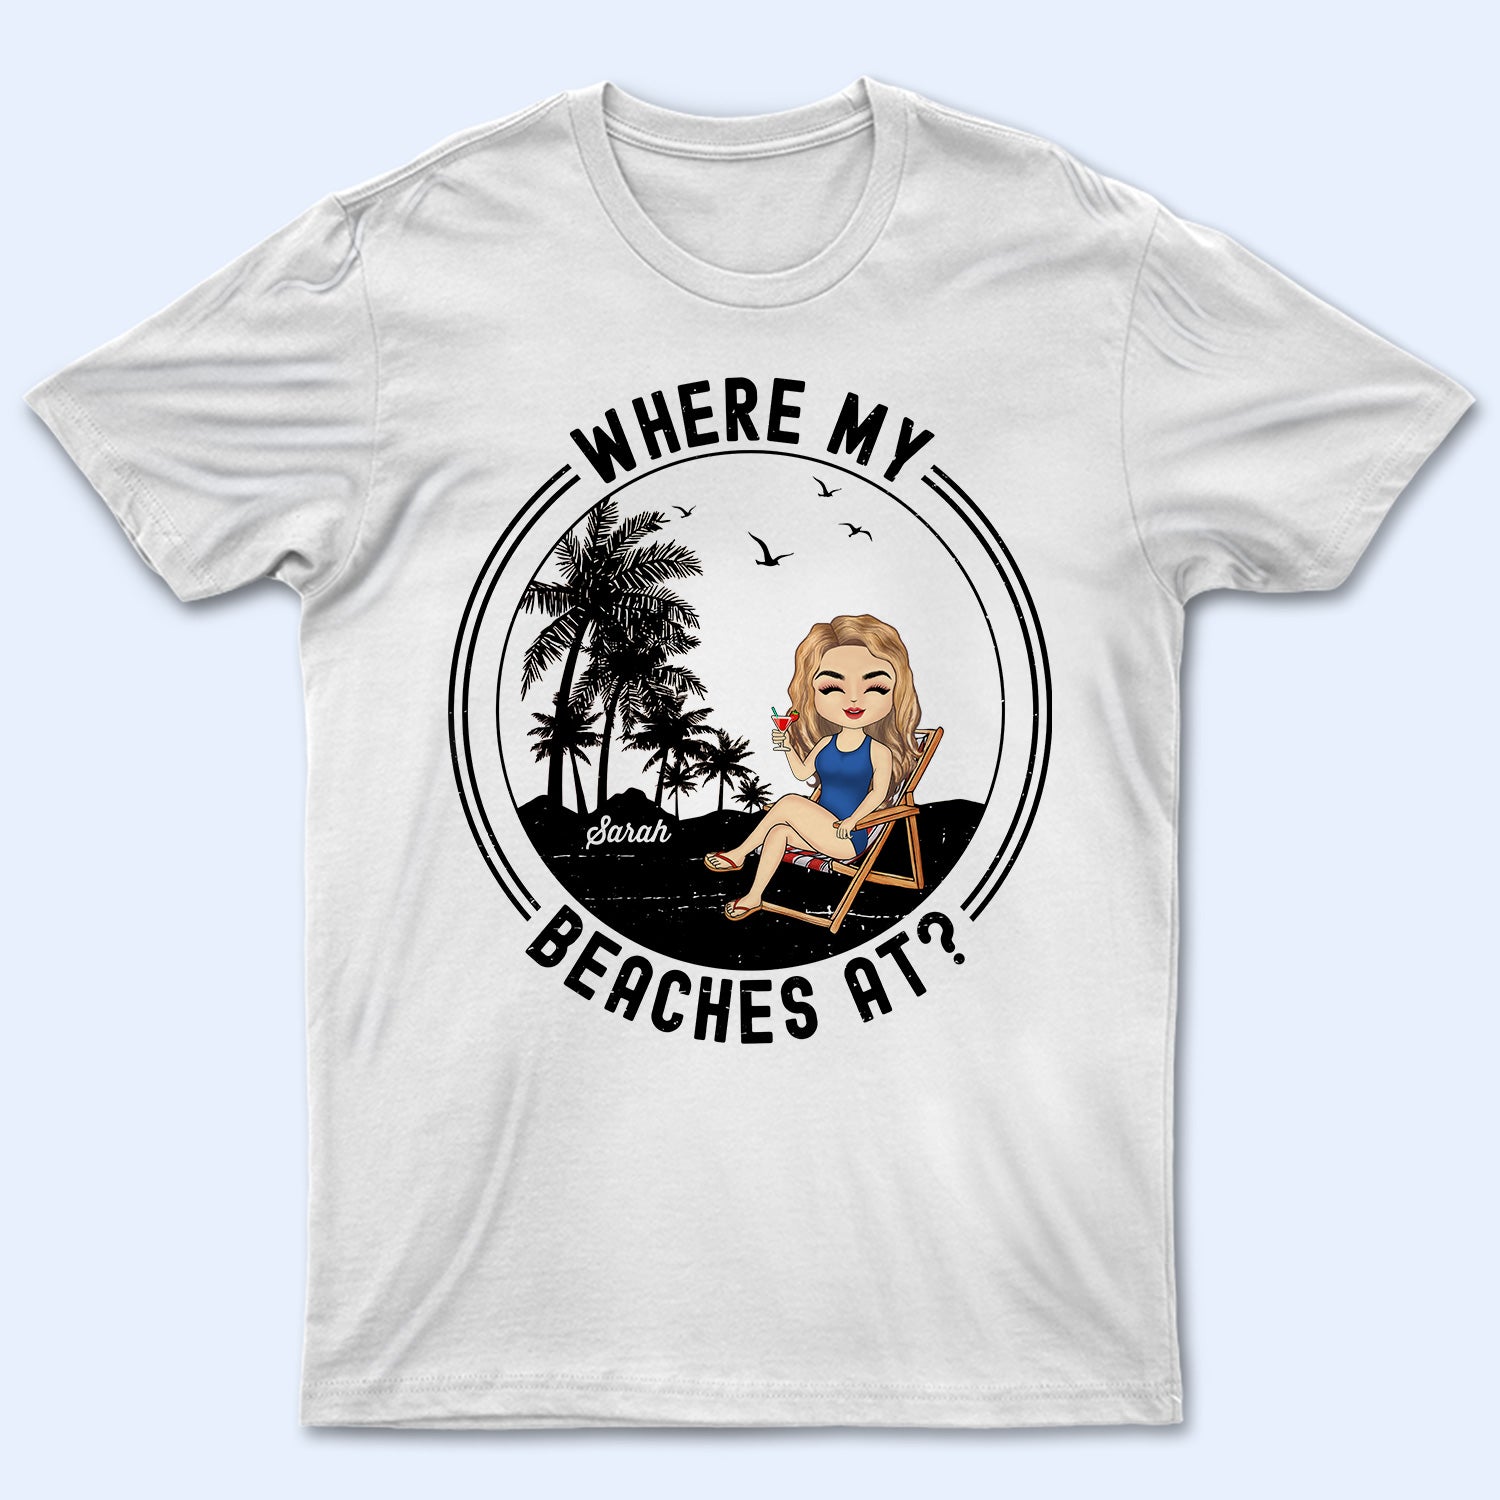 Where My Beaches At - Birthday, Summer Gift For Him, Her, Yourself, Girlfriend, Boyfriend, BFF Best Friends, Traveling Lovers - Personalized Custom T Shirt